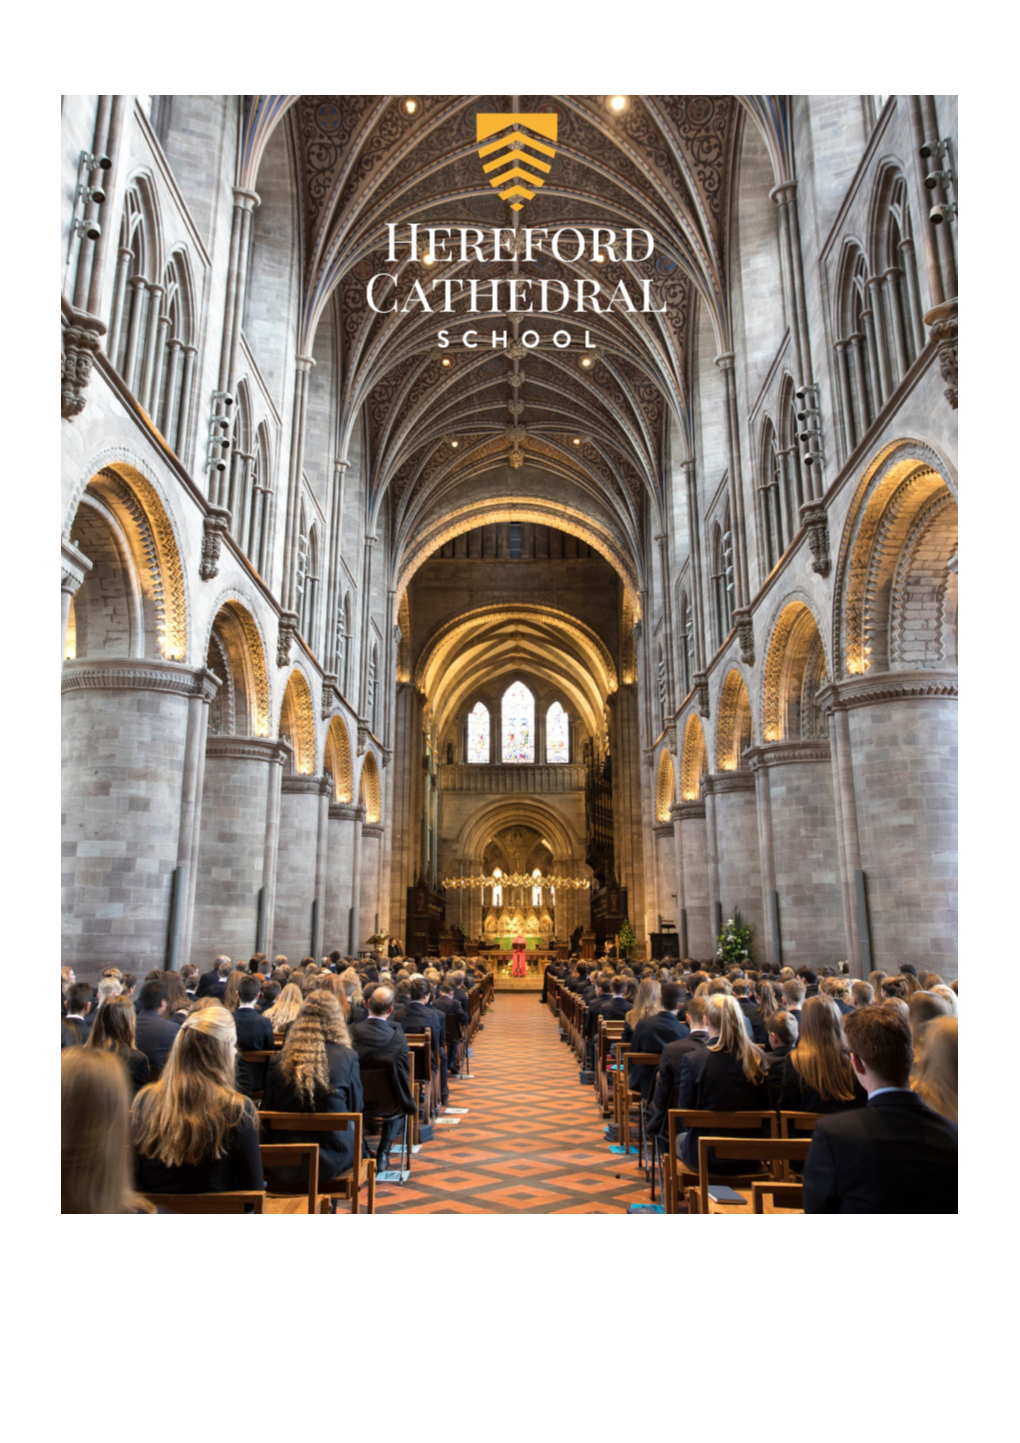 Thank You for Your Interest in Working with Us at Hereford Cathedral School. I Hope That